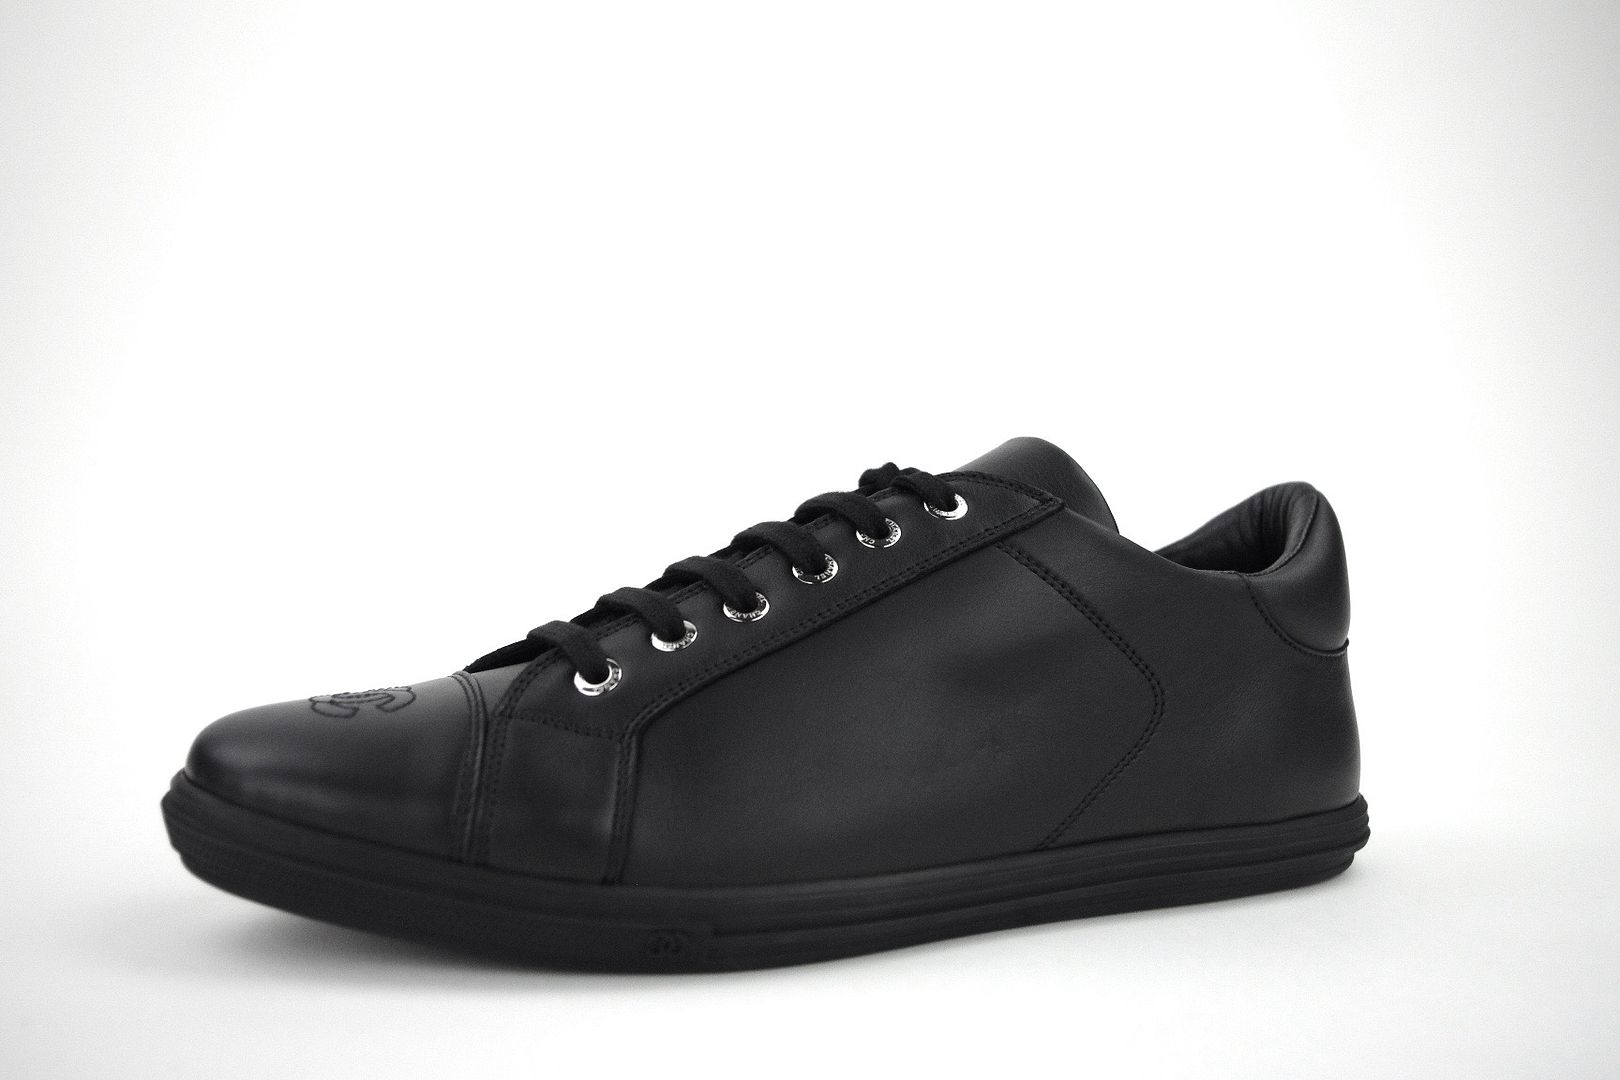 New CHANEL Men's Black Leather sneakers tennis shoes CC logo 42 9 Made ...